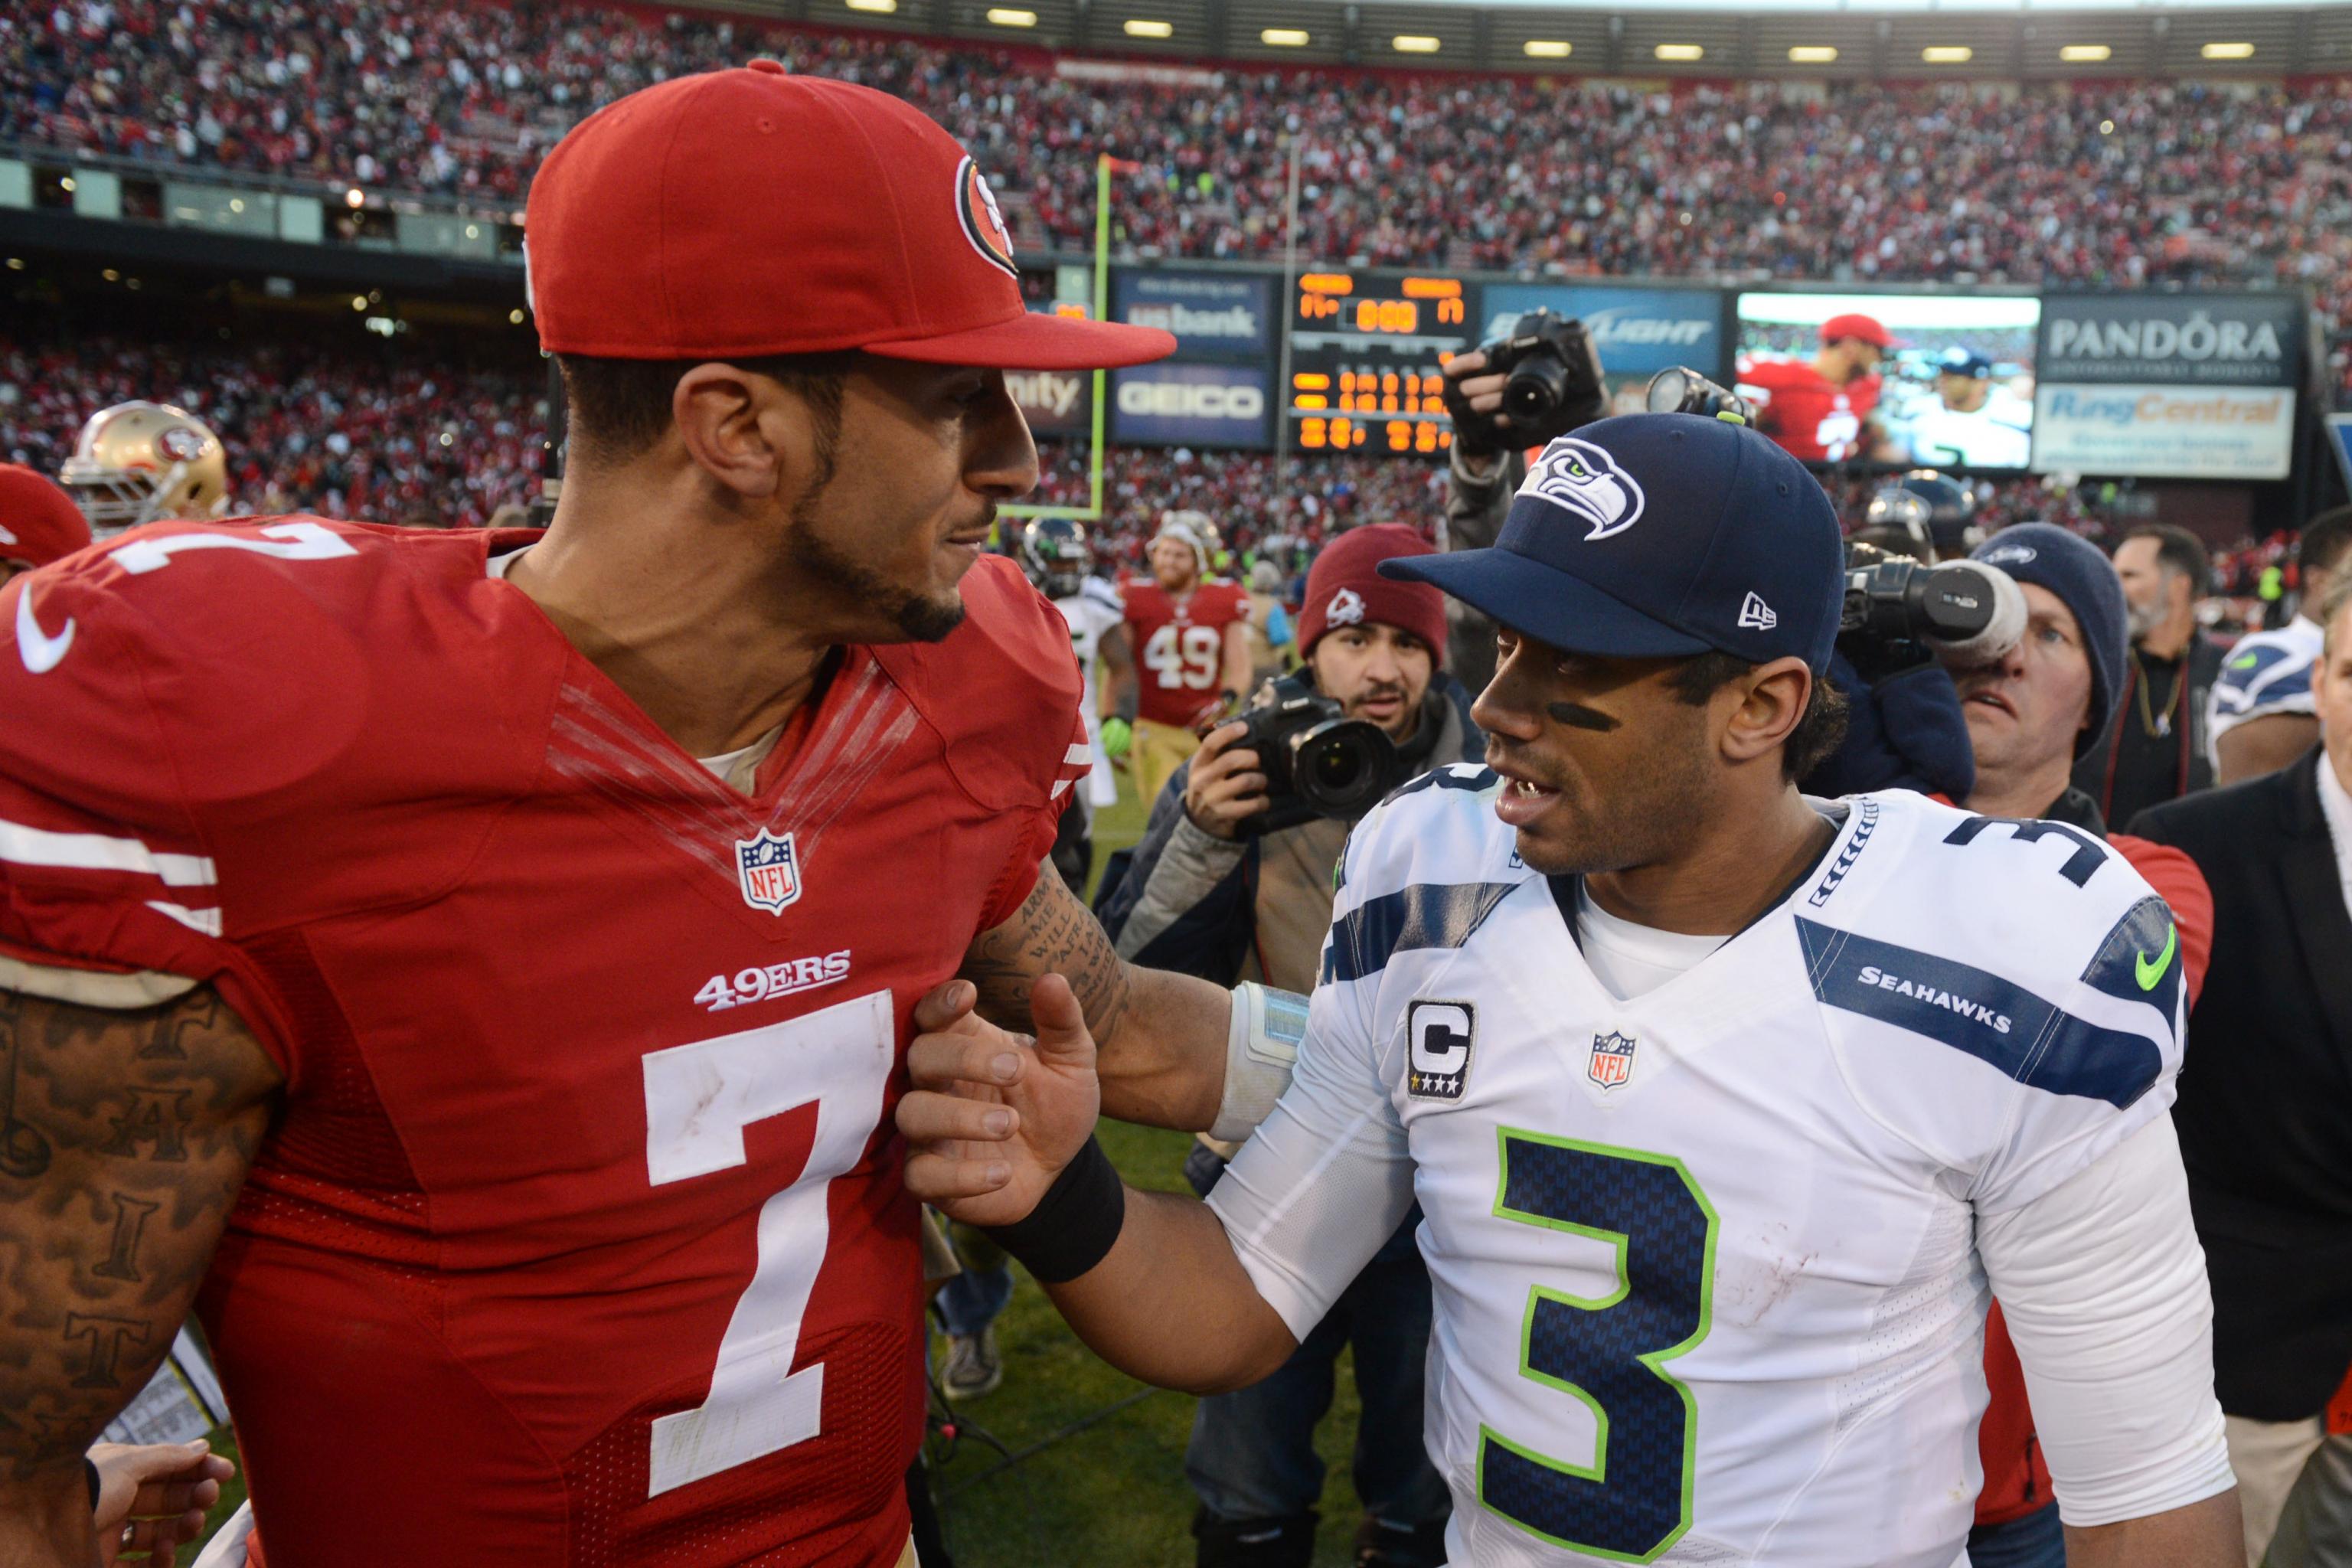 NFL Playoffs Schedule 2014: Conference Championships half set, Game times  published - The Phinsider